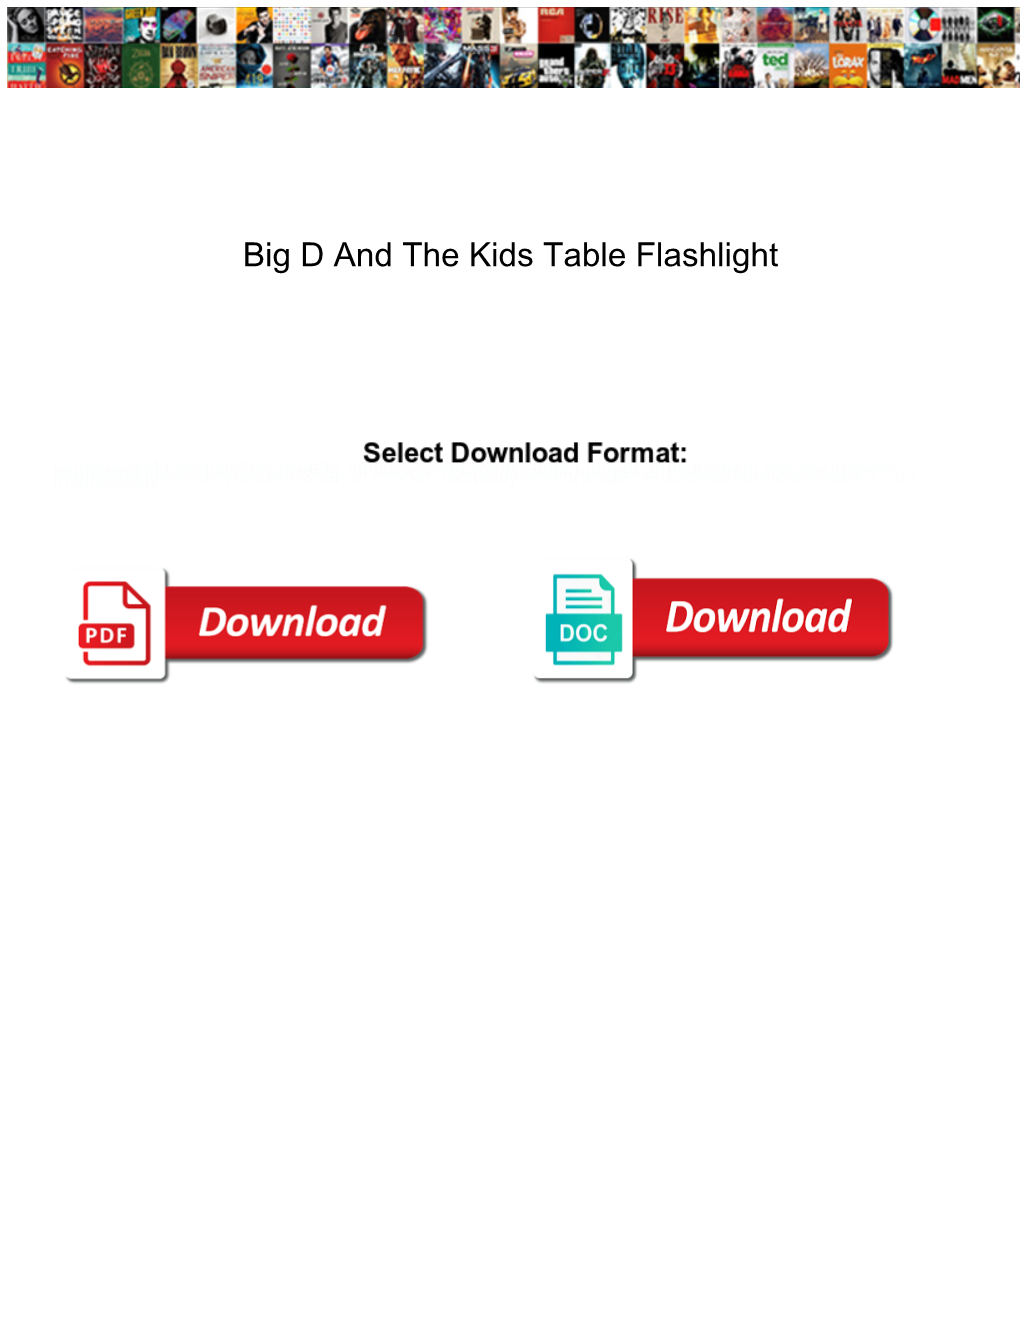 Big D and the Kids Table Flashlight